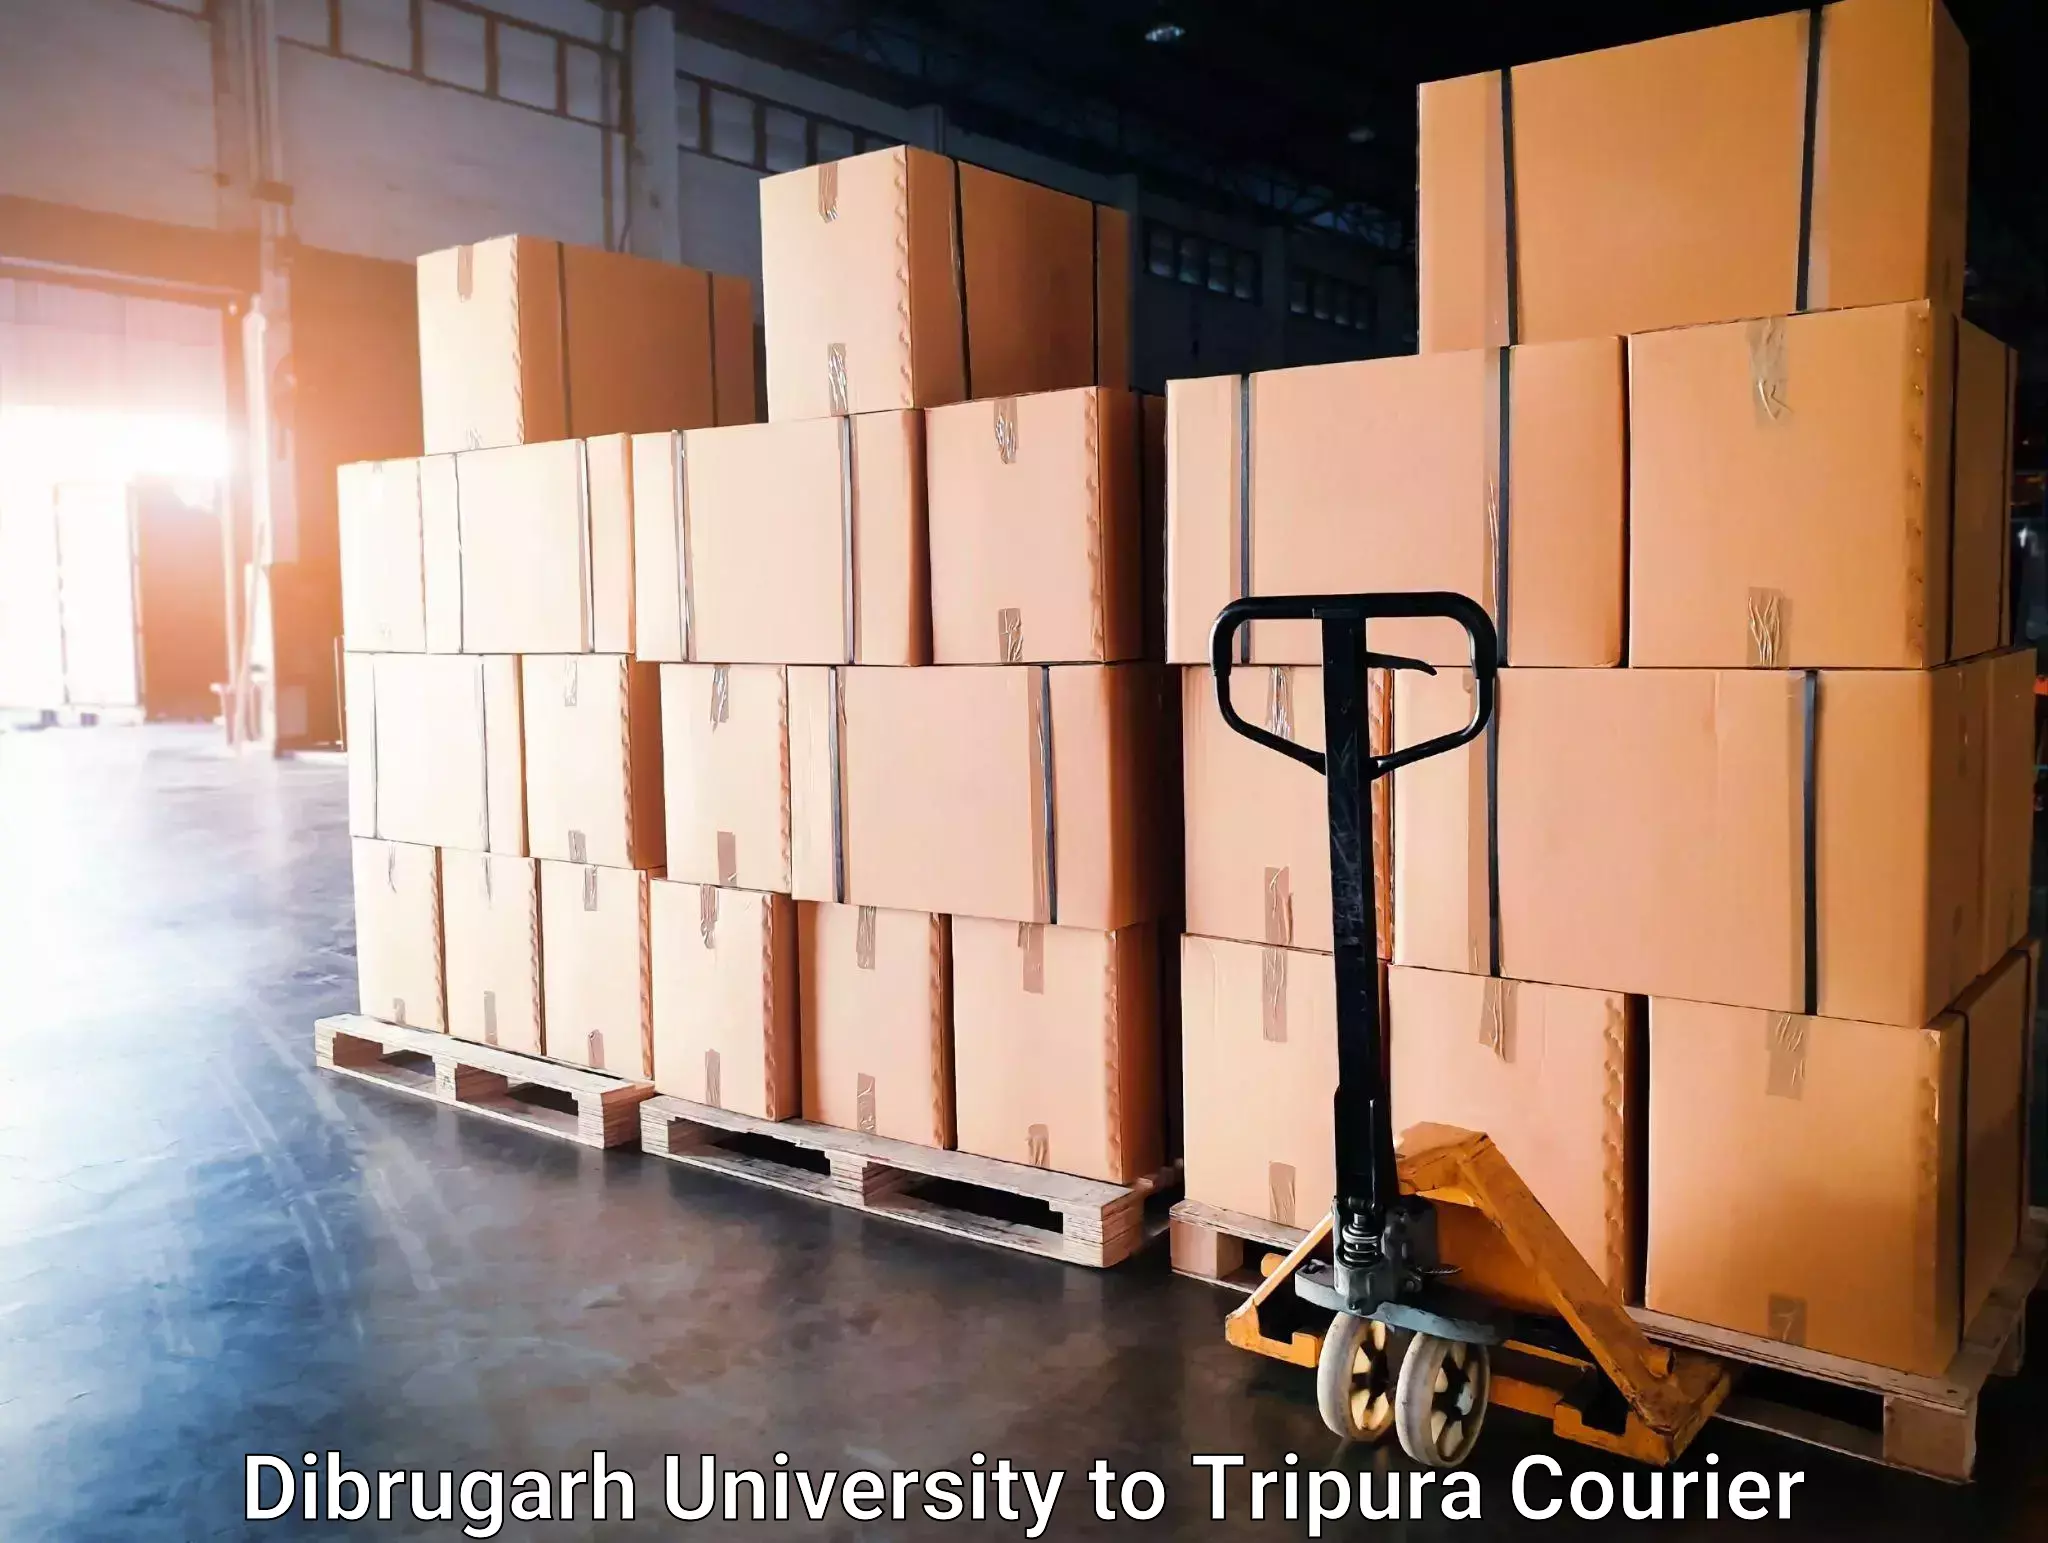 Package delivery network Dibrugarh University to Tripura